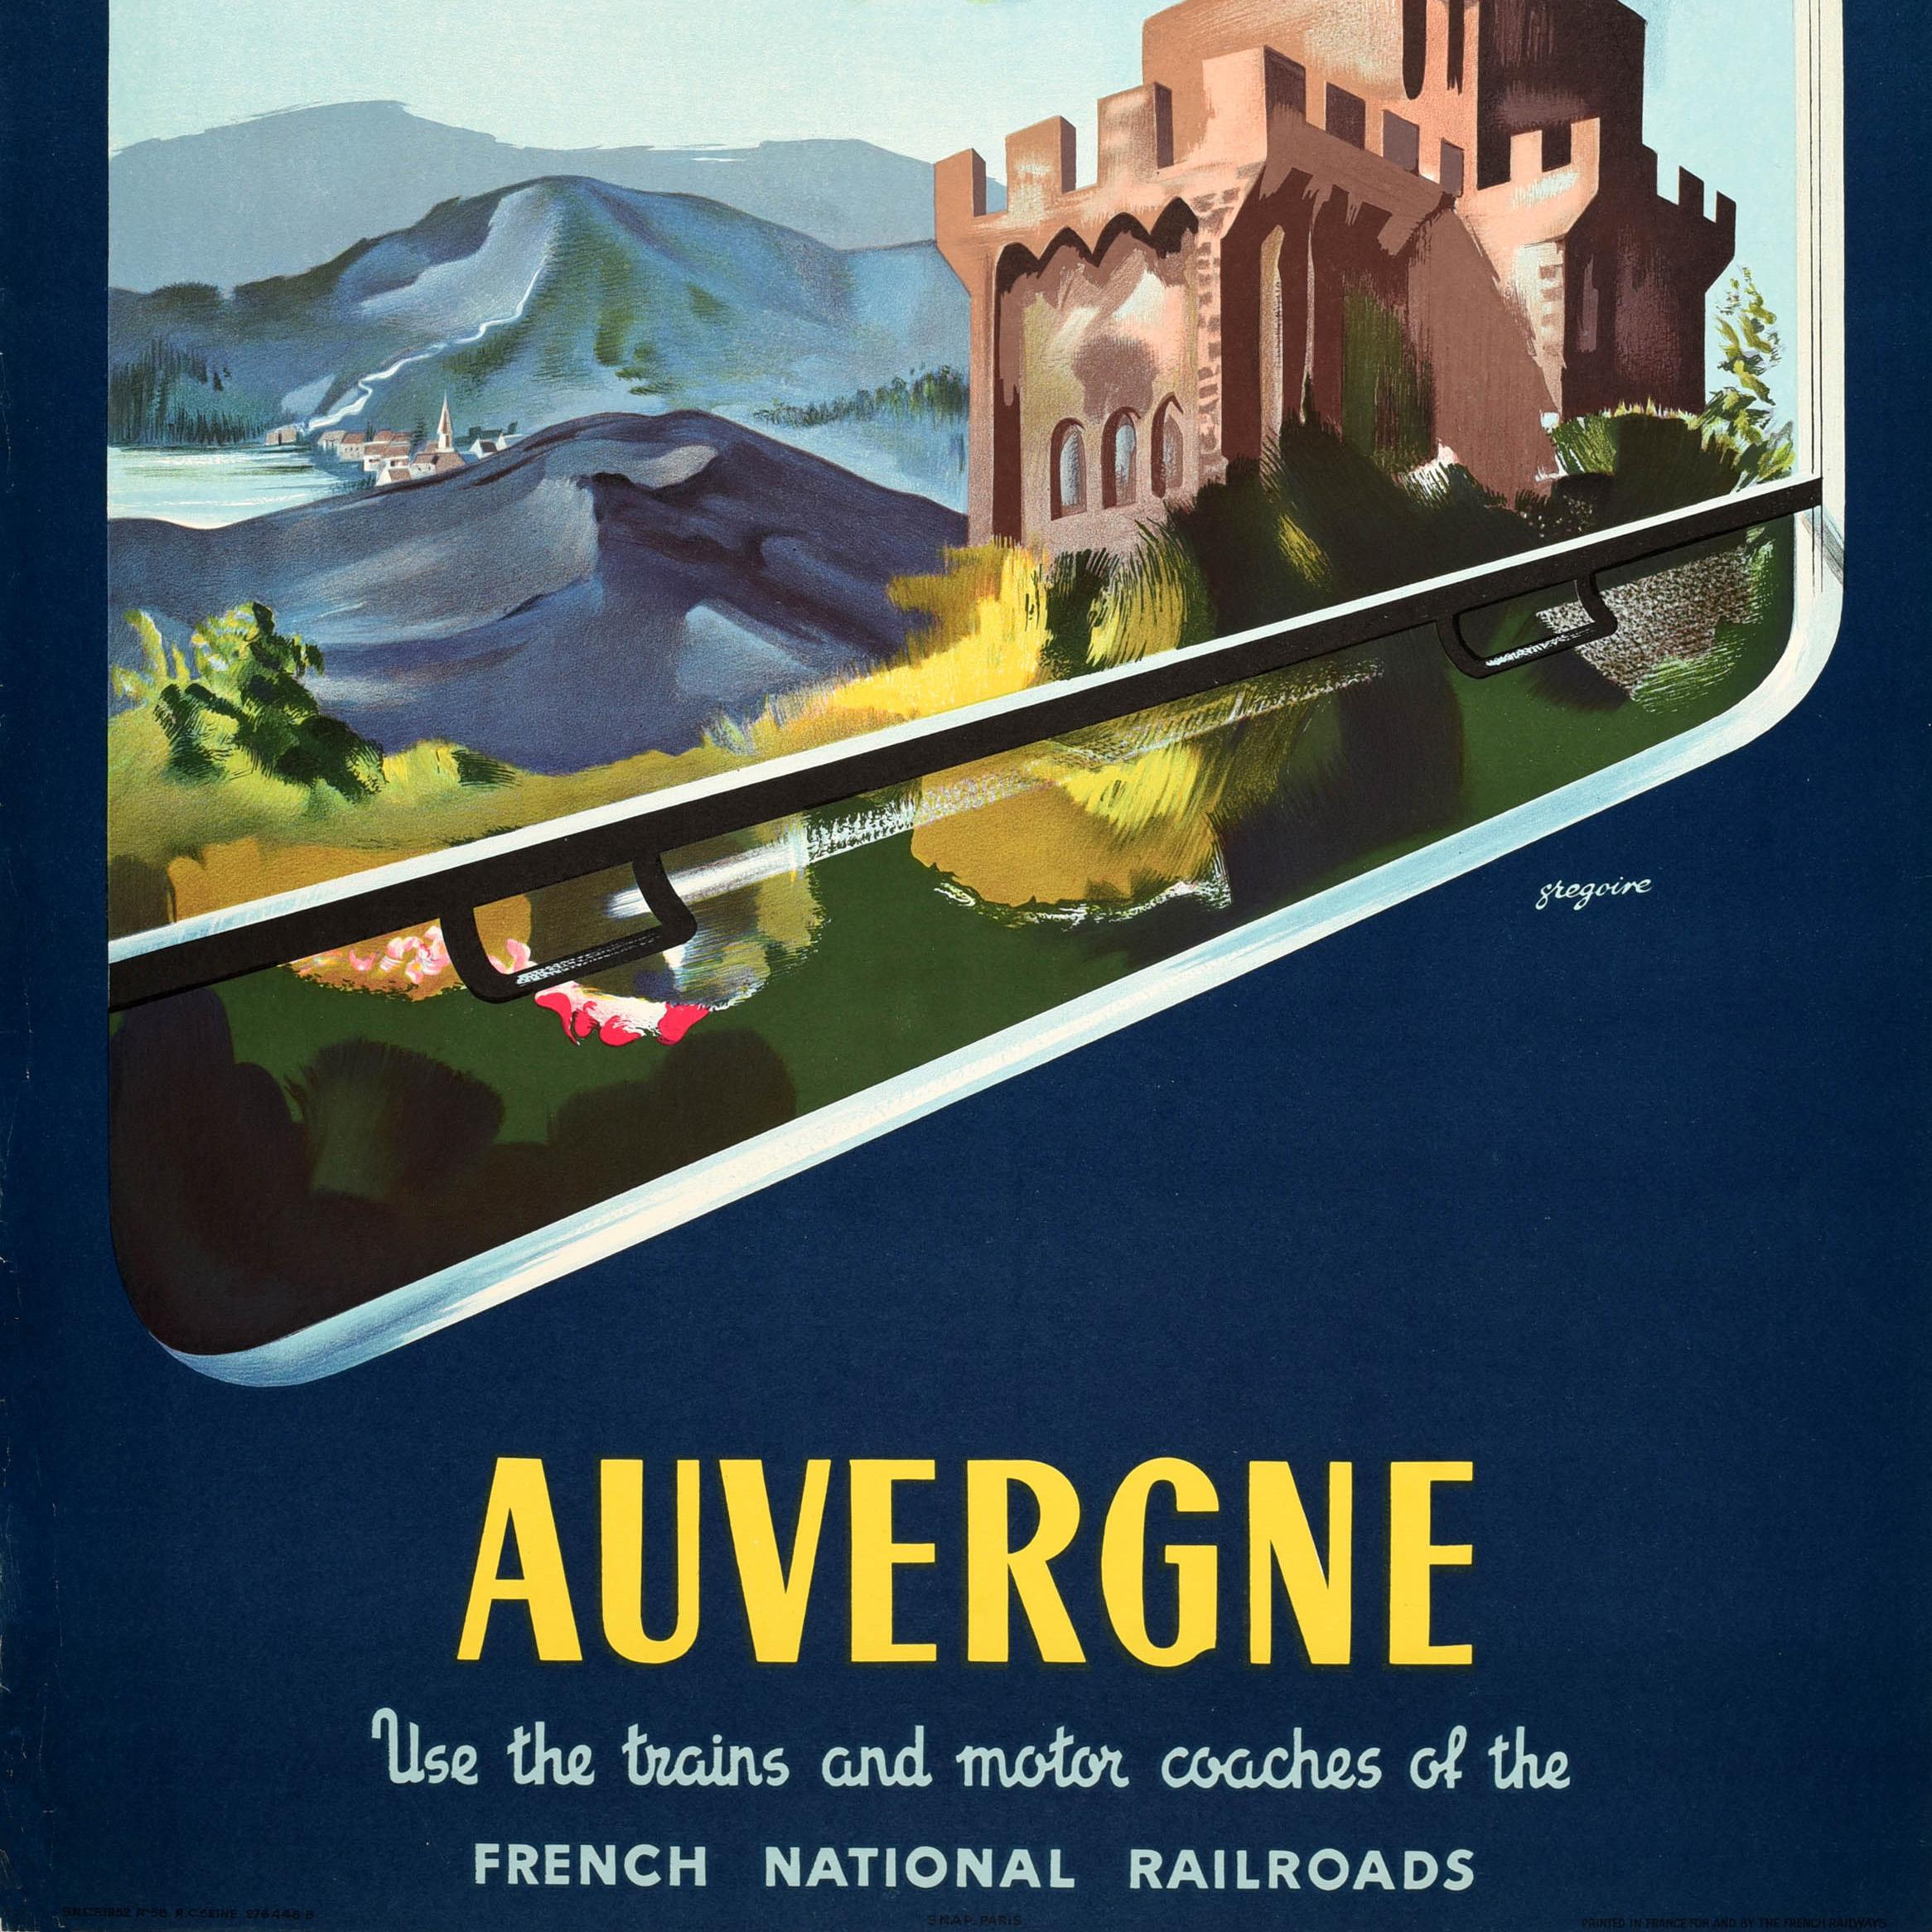 Original Vintage Railway Travel Poster Auvergne Visit France SNCF Rhone Alps Art In Good Condition For Sale In London, GB